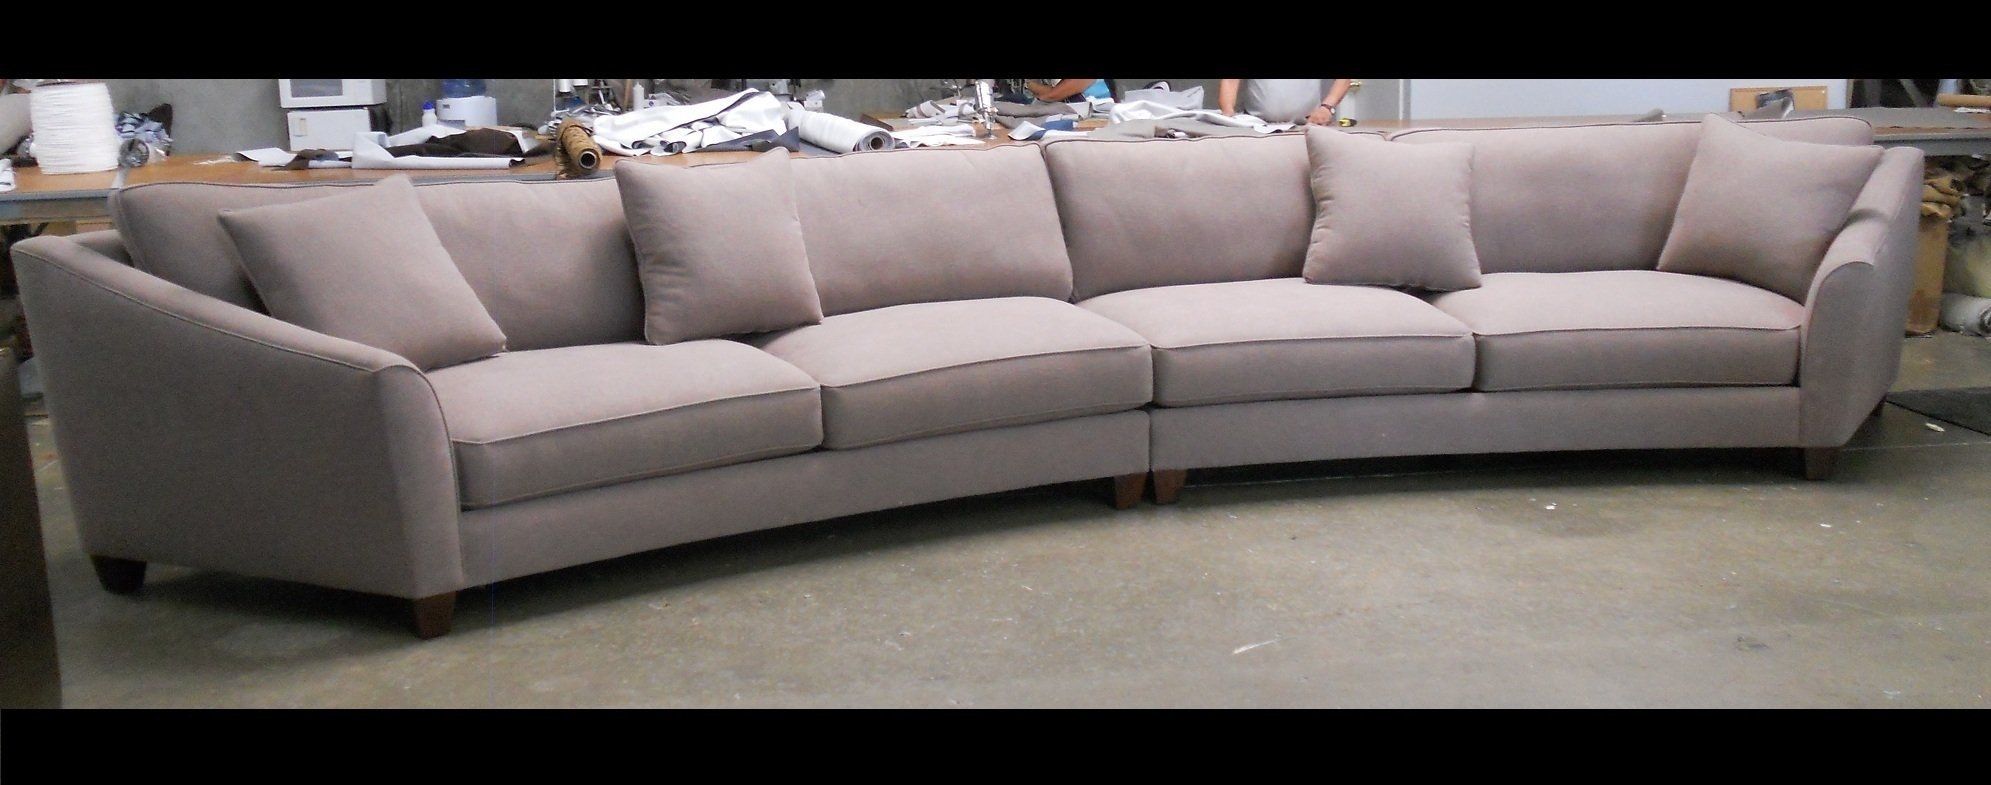 Curved Sectional Sofa Set Rich Comfortable Upholstered Fabric For Circle Sectional Sofa (View 11 of 12)